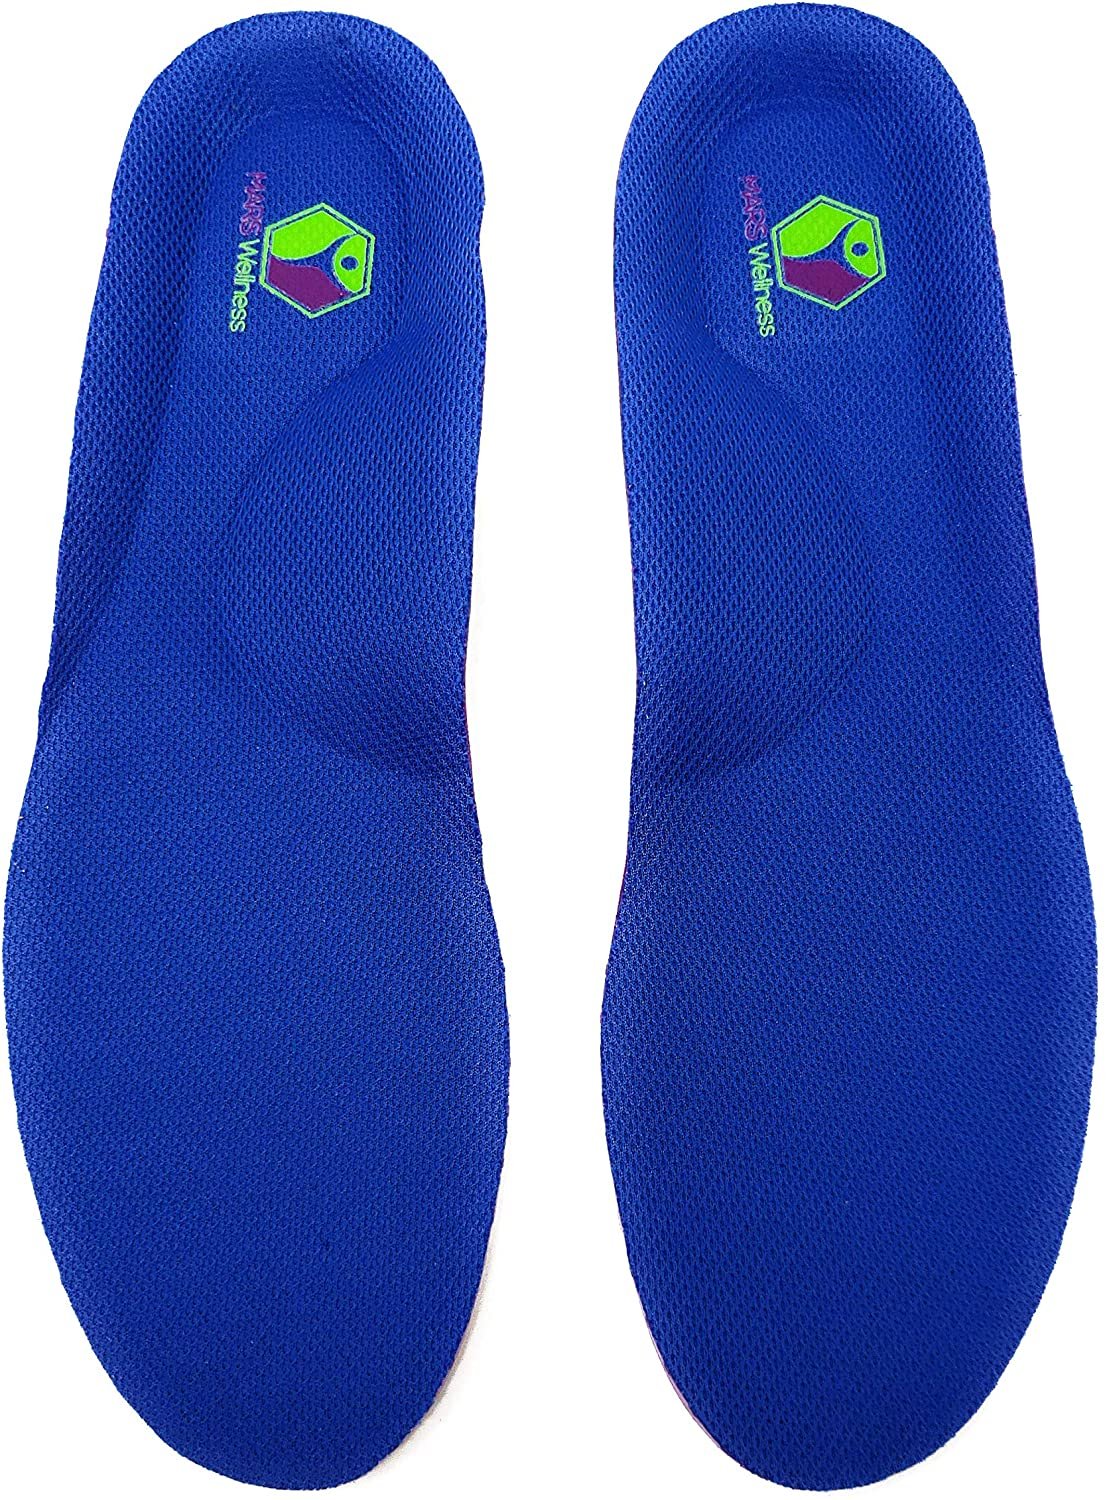 PowerTraq Sport Orthotic - Medical Grade High Arch Support Orthopedic Orthotic Insoles - Plantar Fasciitis, Flat Feet, Foot Pain - Maximum Support - by Mars Wellness